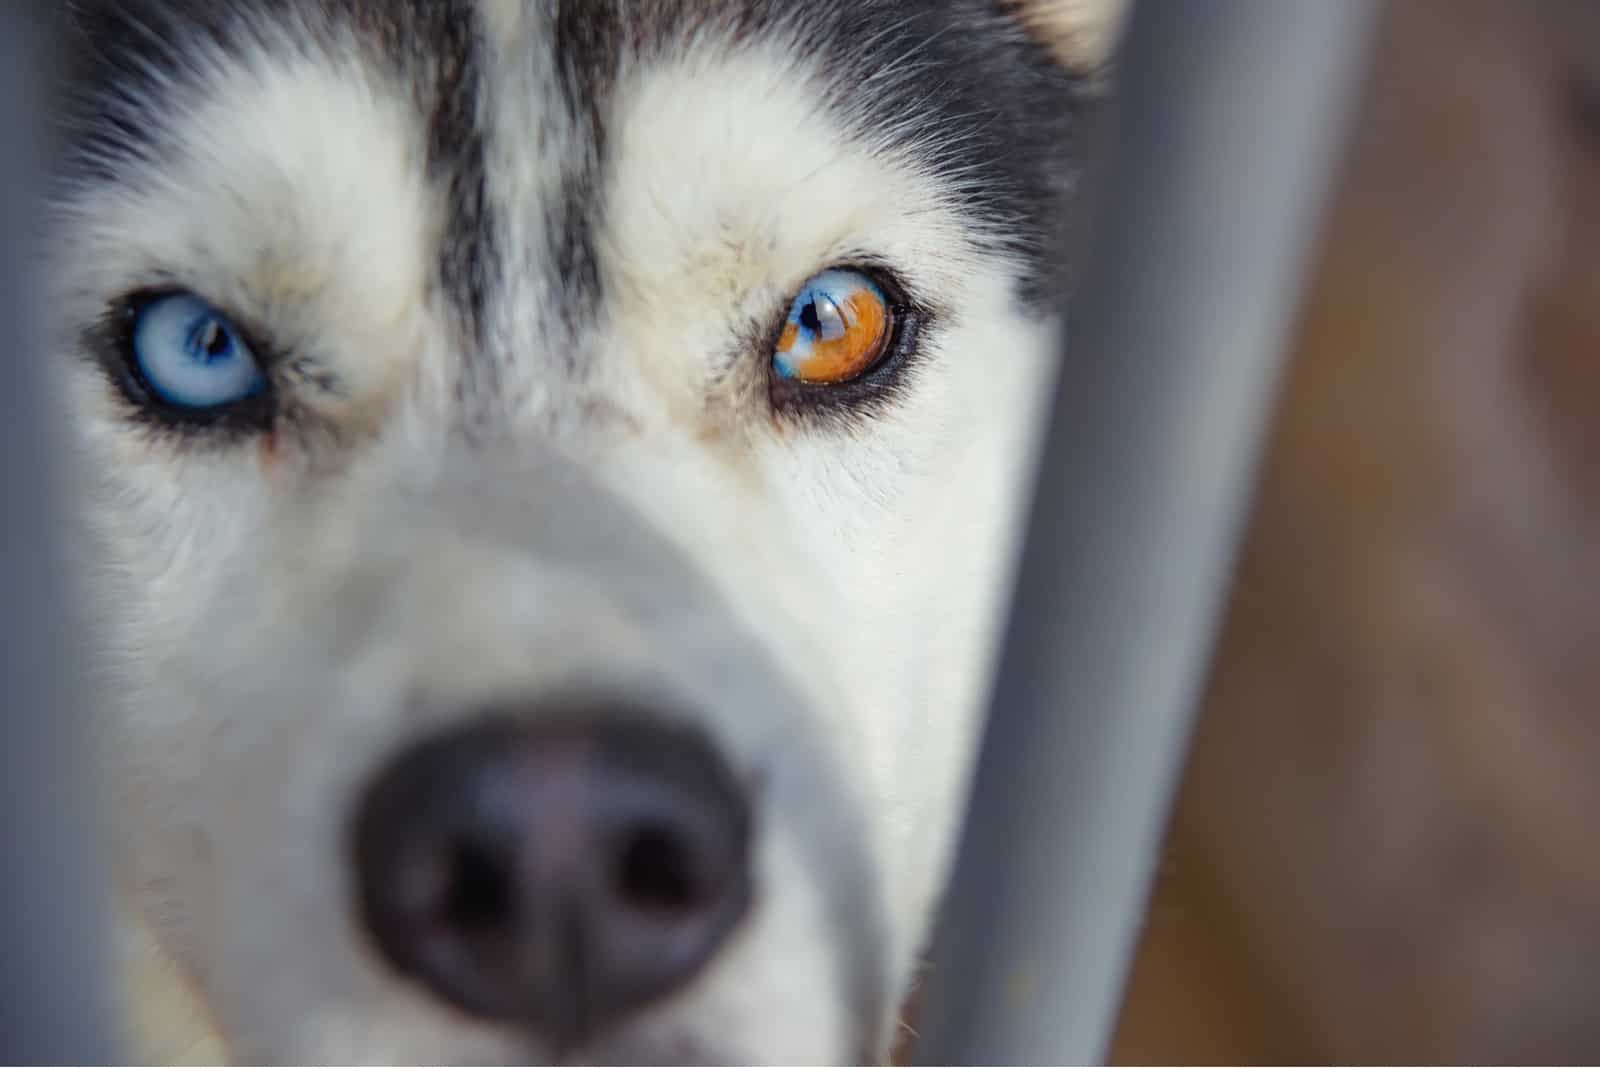 Siberian Husky dog with eyes of different colors